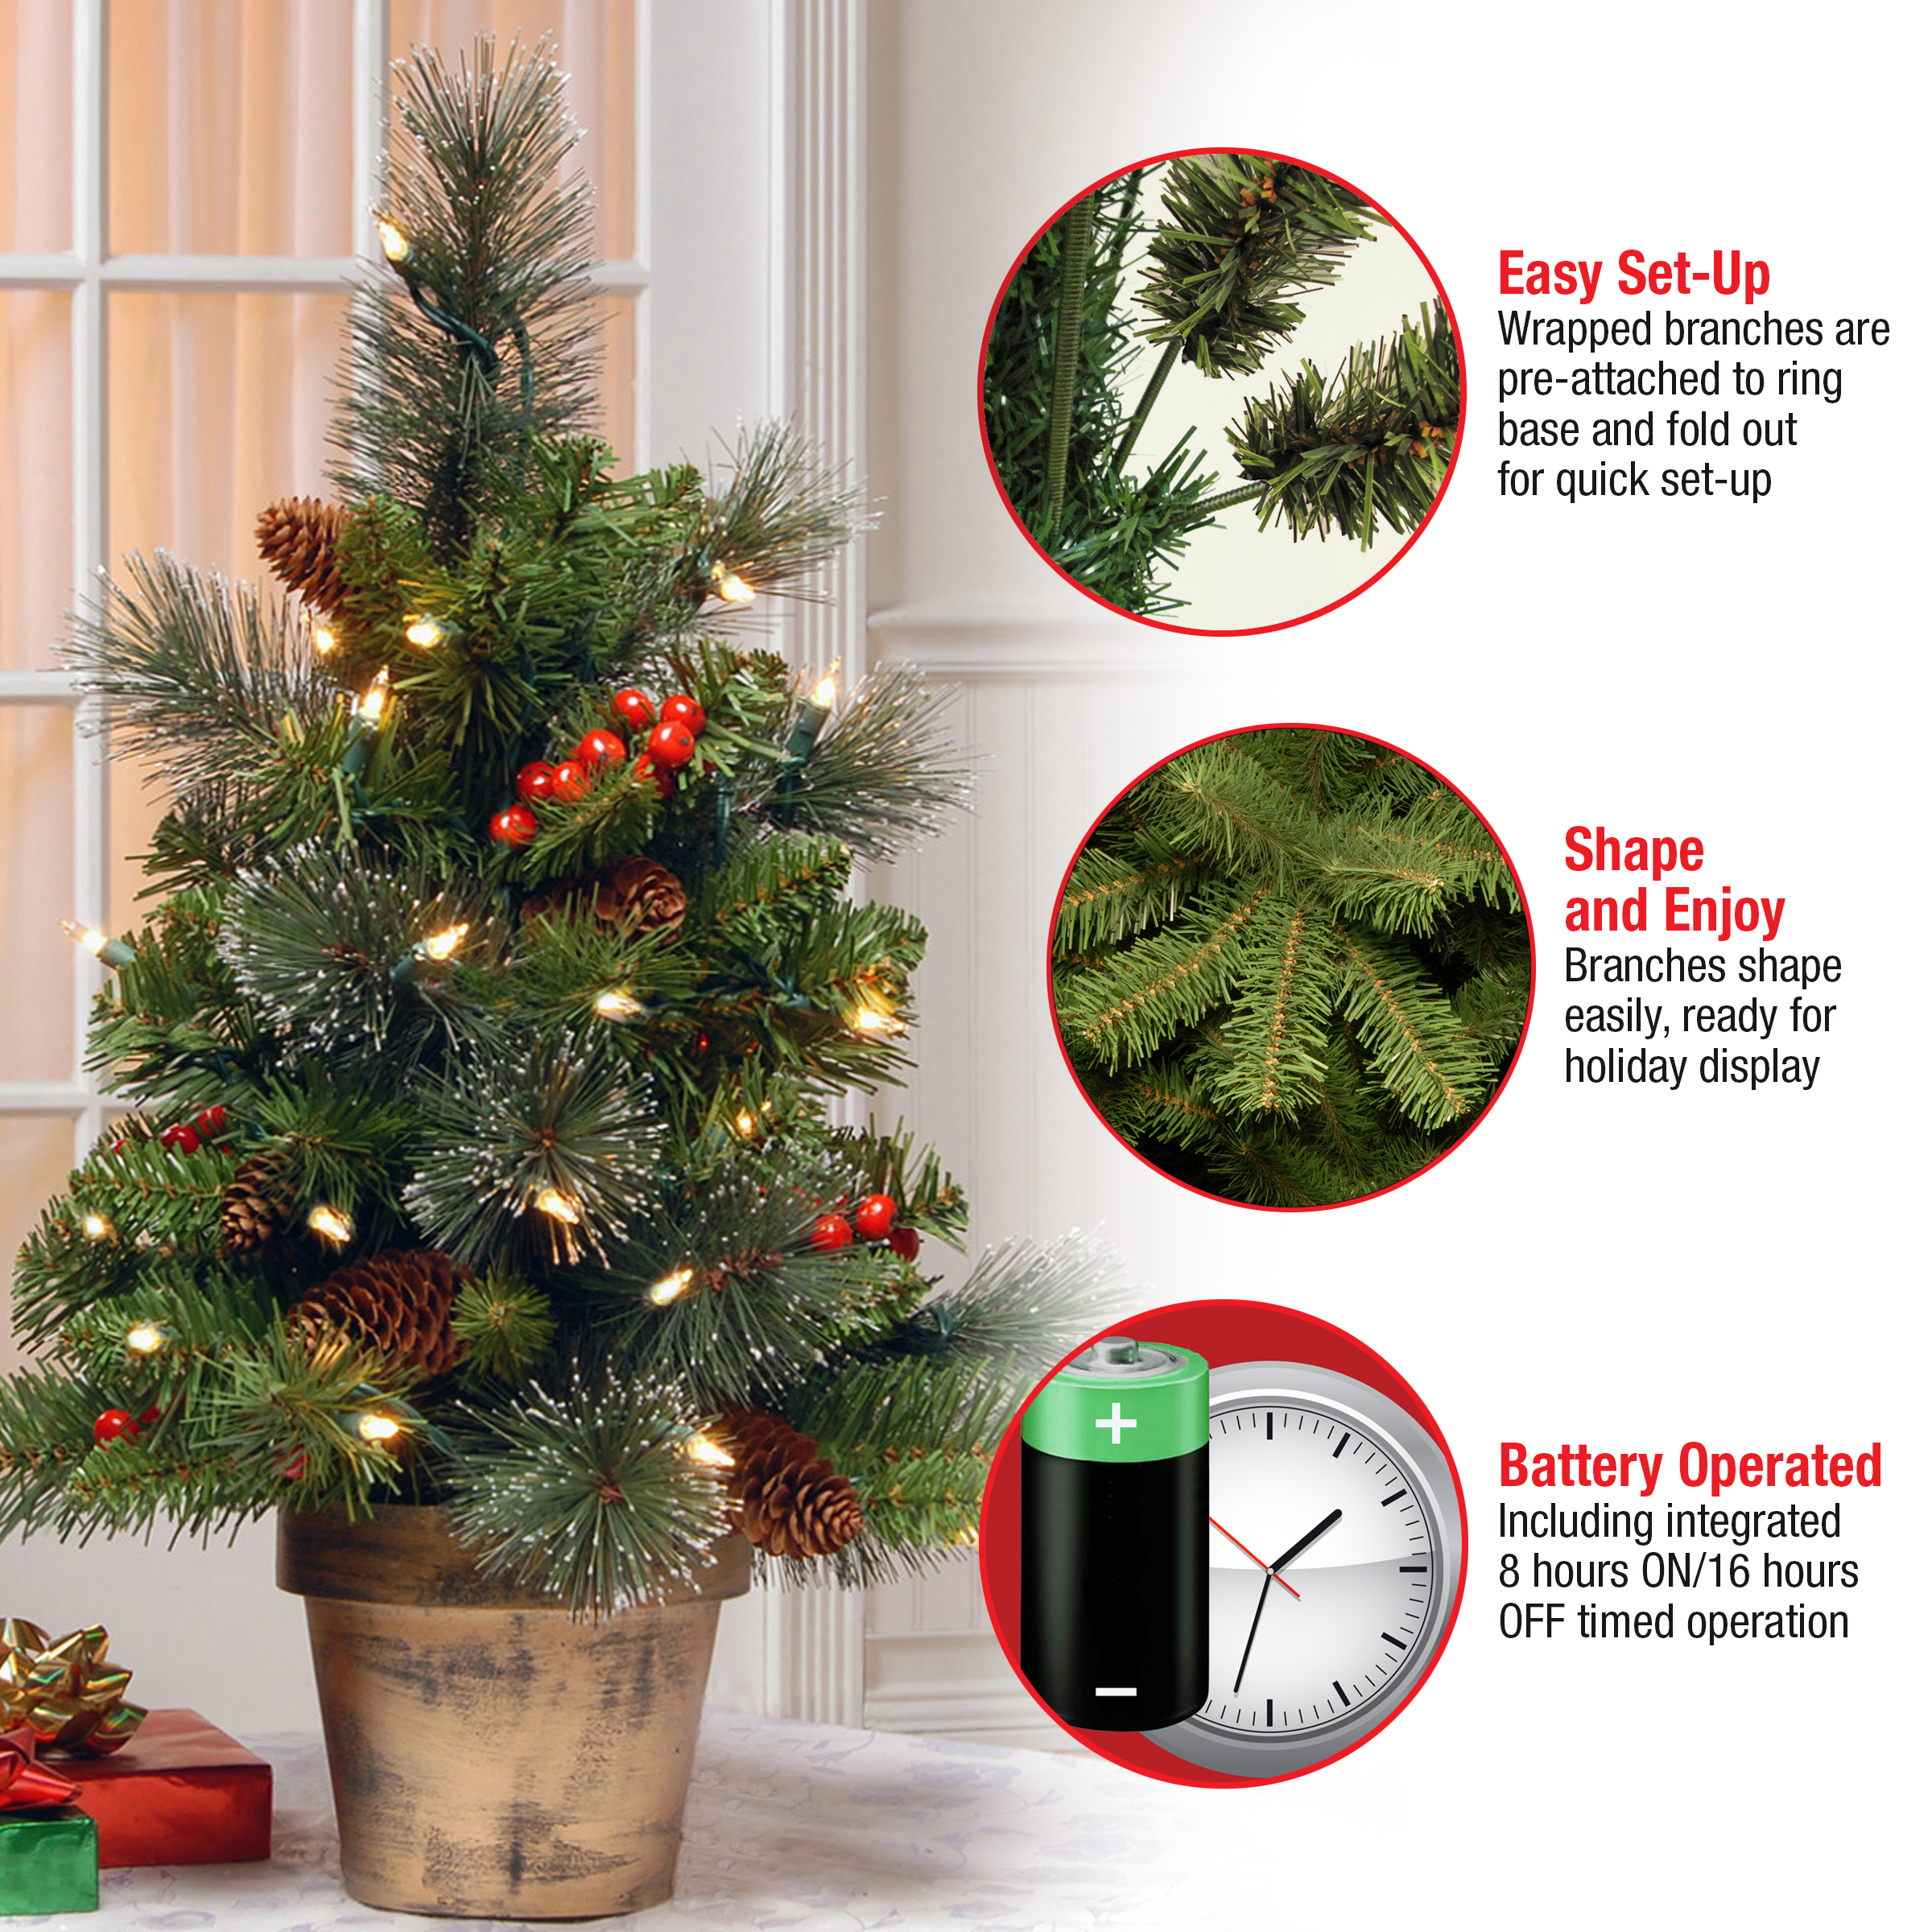 National Tree Company Pre-Lit Artificial Mini Christmas Tree, Green, Crestwood Spruce, White Lights, Decorated with Pine Cones, Berry Clusters, Frosted Branches, Includes Pot Base, 2 Feet - image 5 of 5